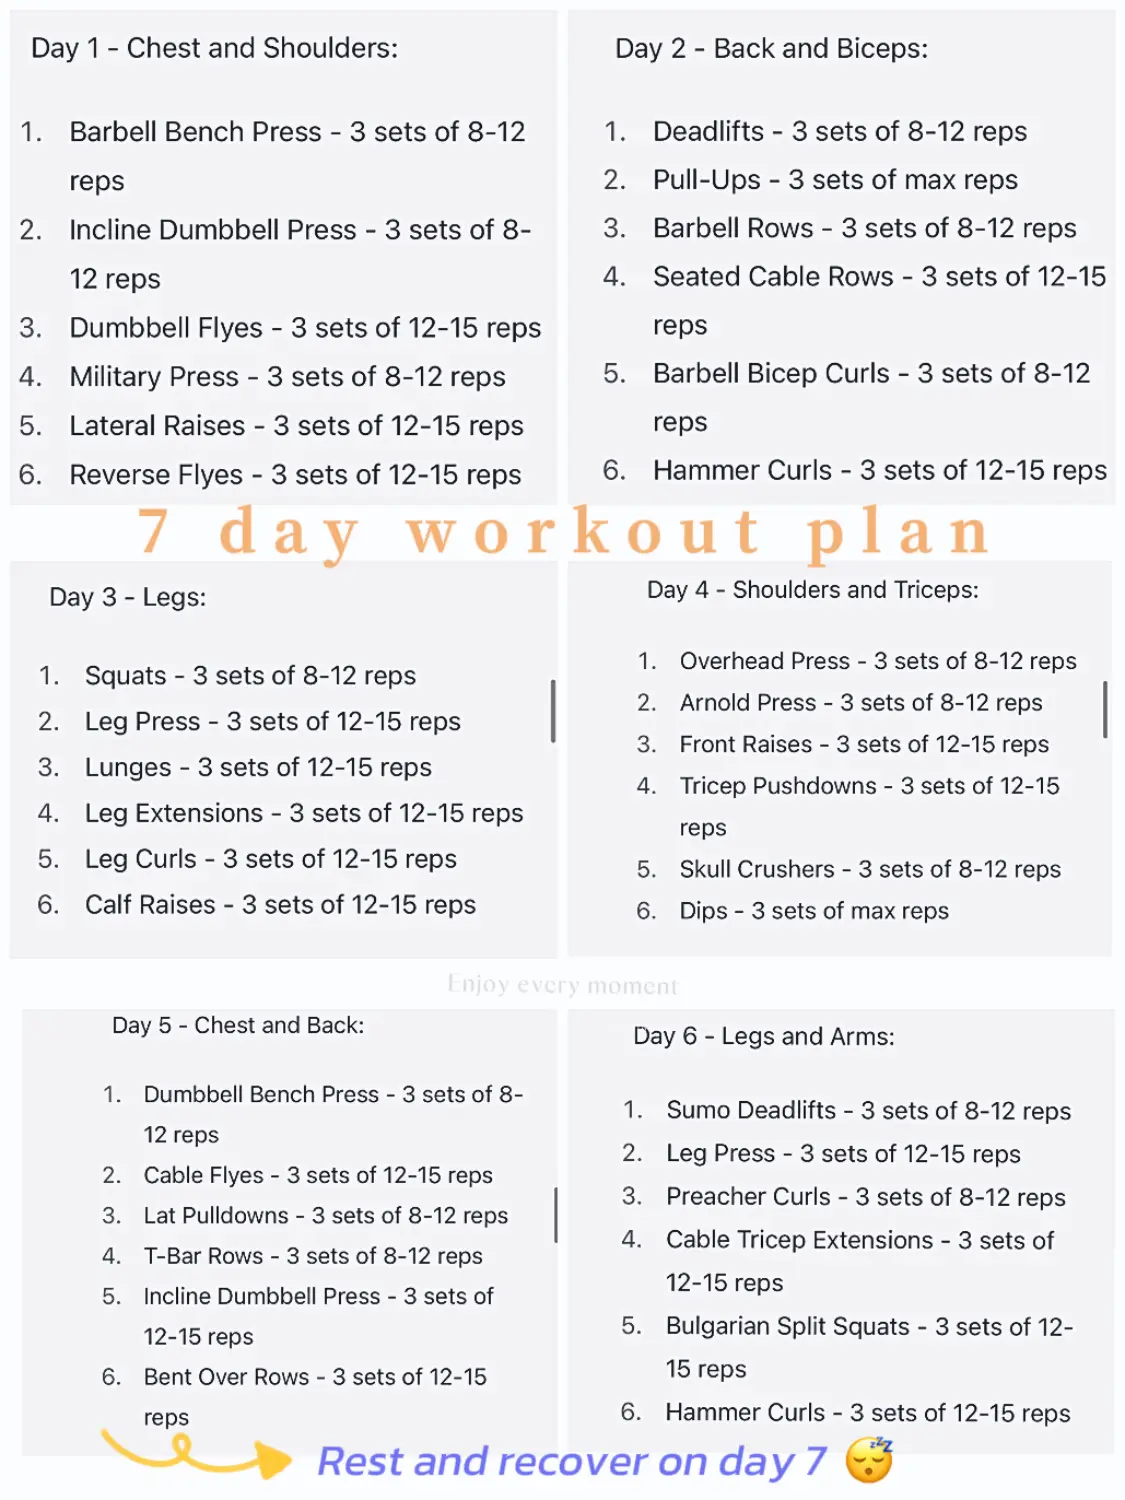 Workout > Day 1 - Chest